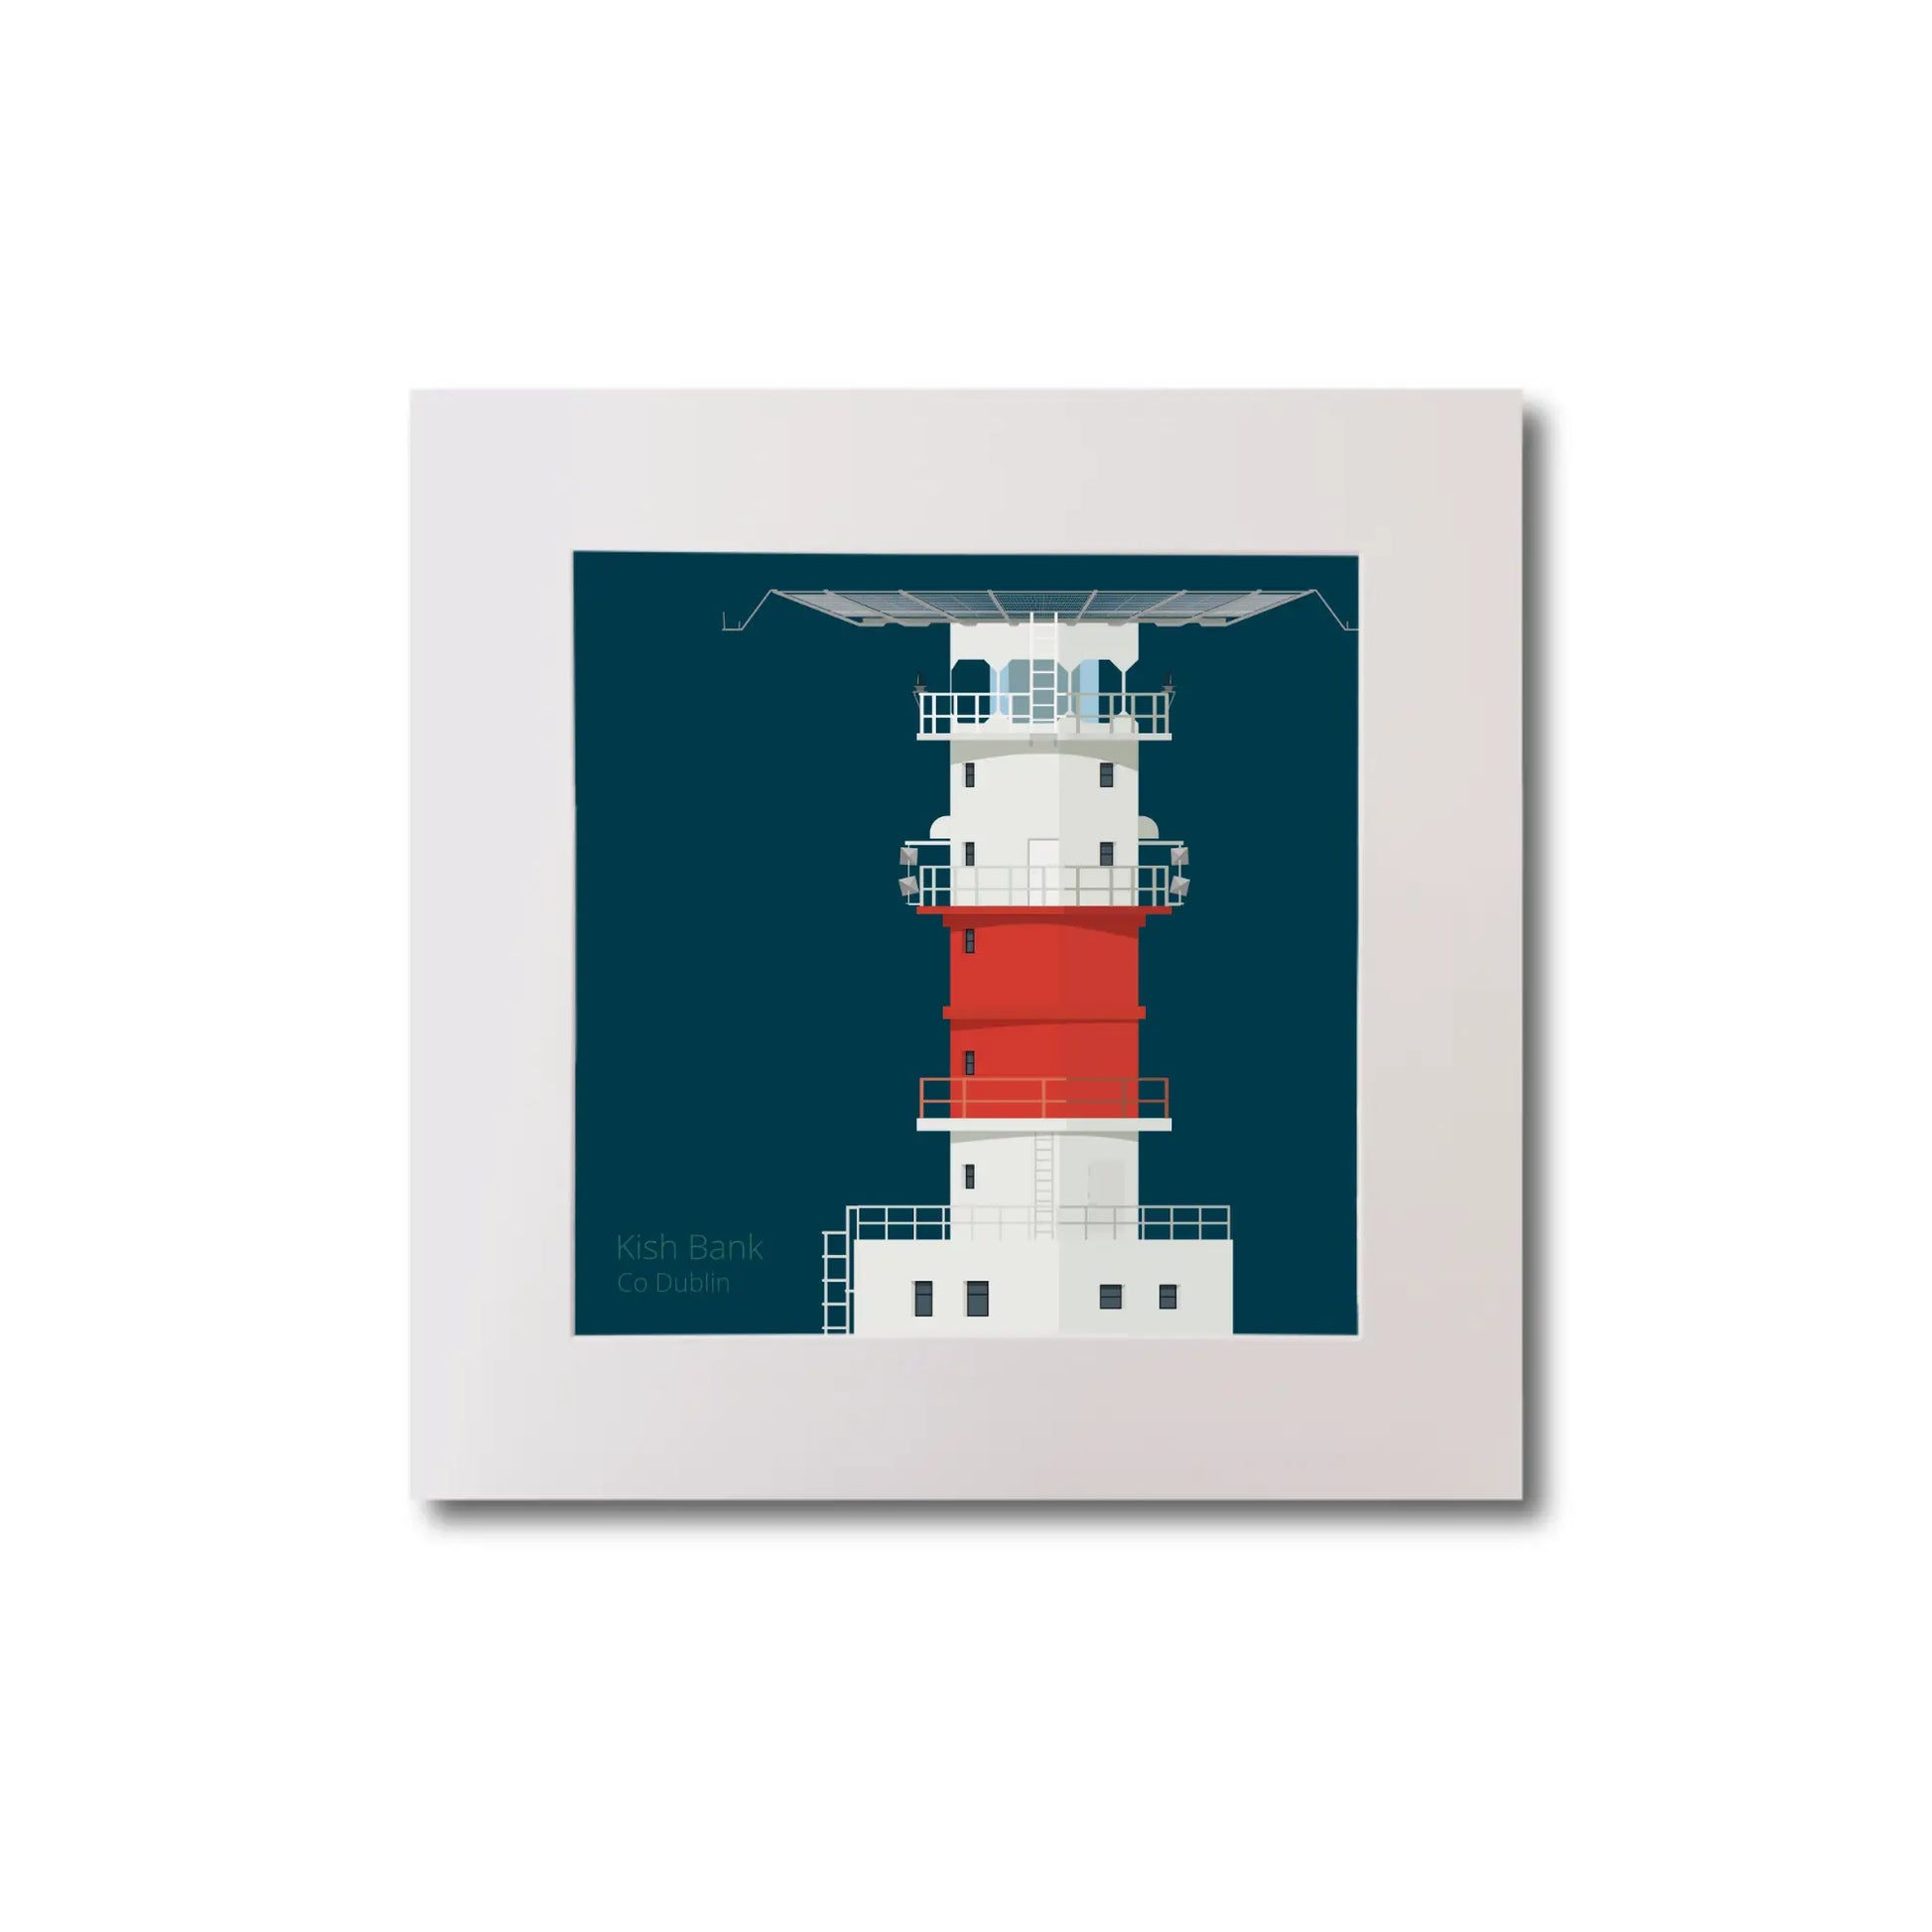 Illustration of Kish lighthouse on a midnight blue background, mounted and measuring 20x20cm.